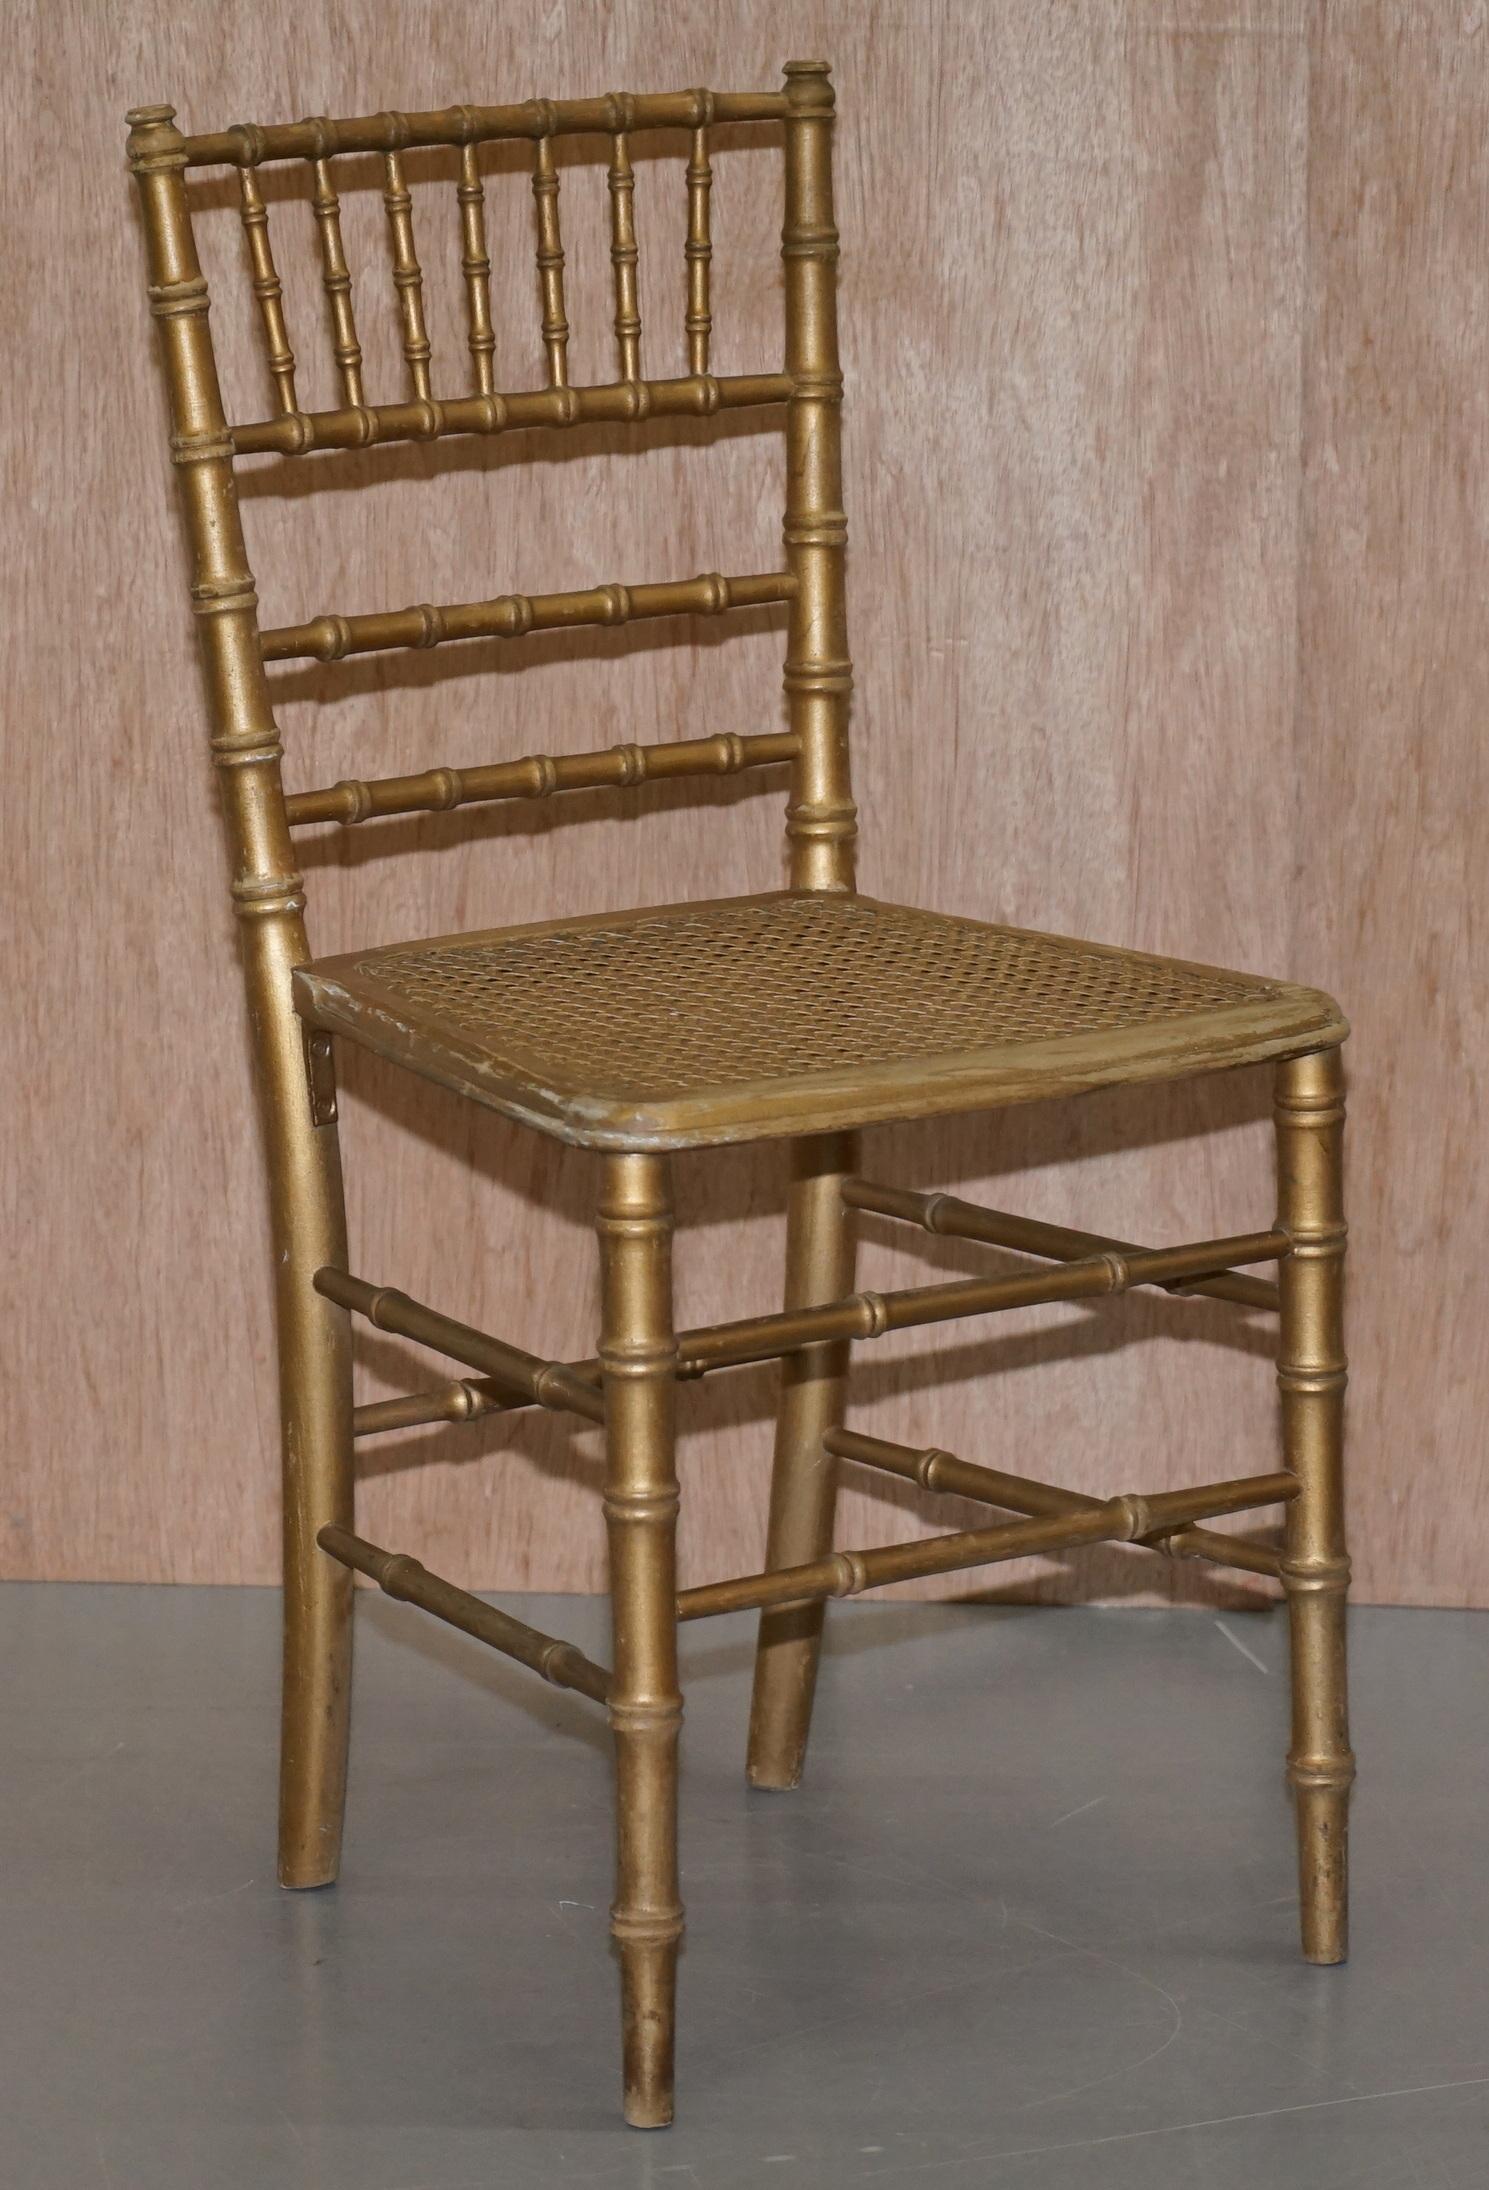 We are delighted to offer for sale this lovely pair of original Regency style giltwood famboo chairs

A very good looking and collectable pair of occasional chairs. These are Edwardian however I have a pair of later Regency chairs with the